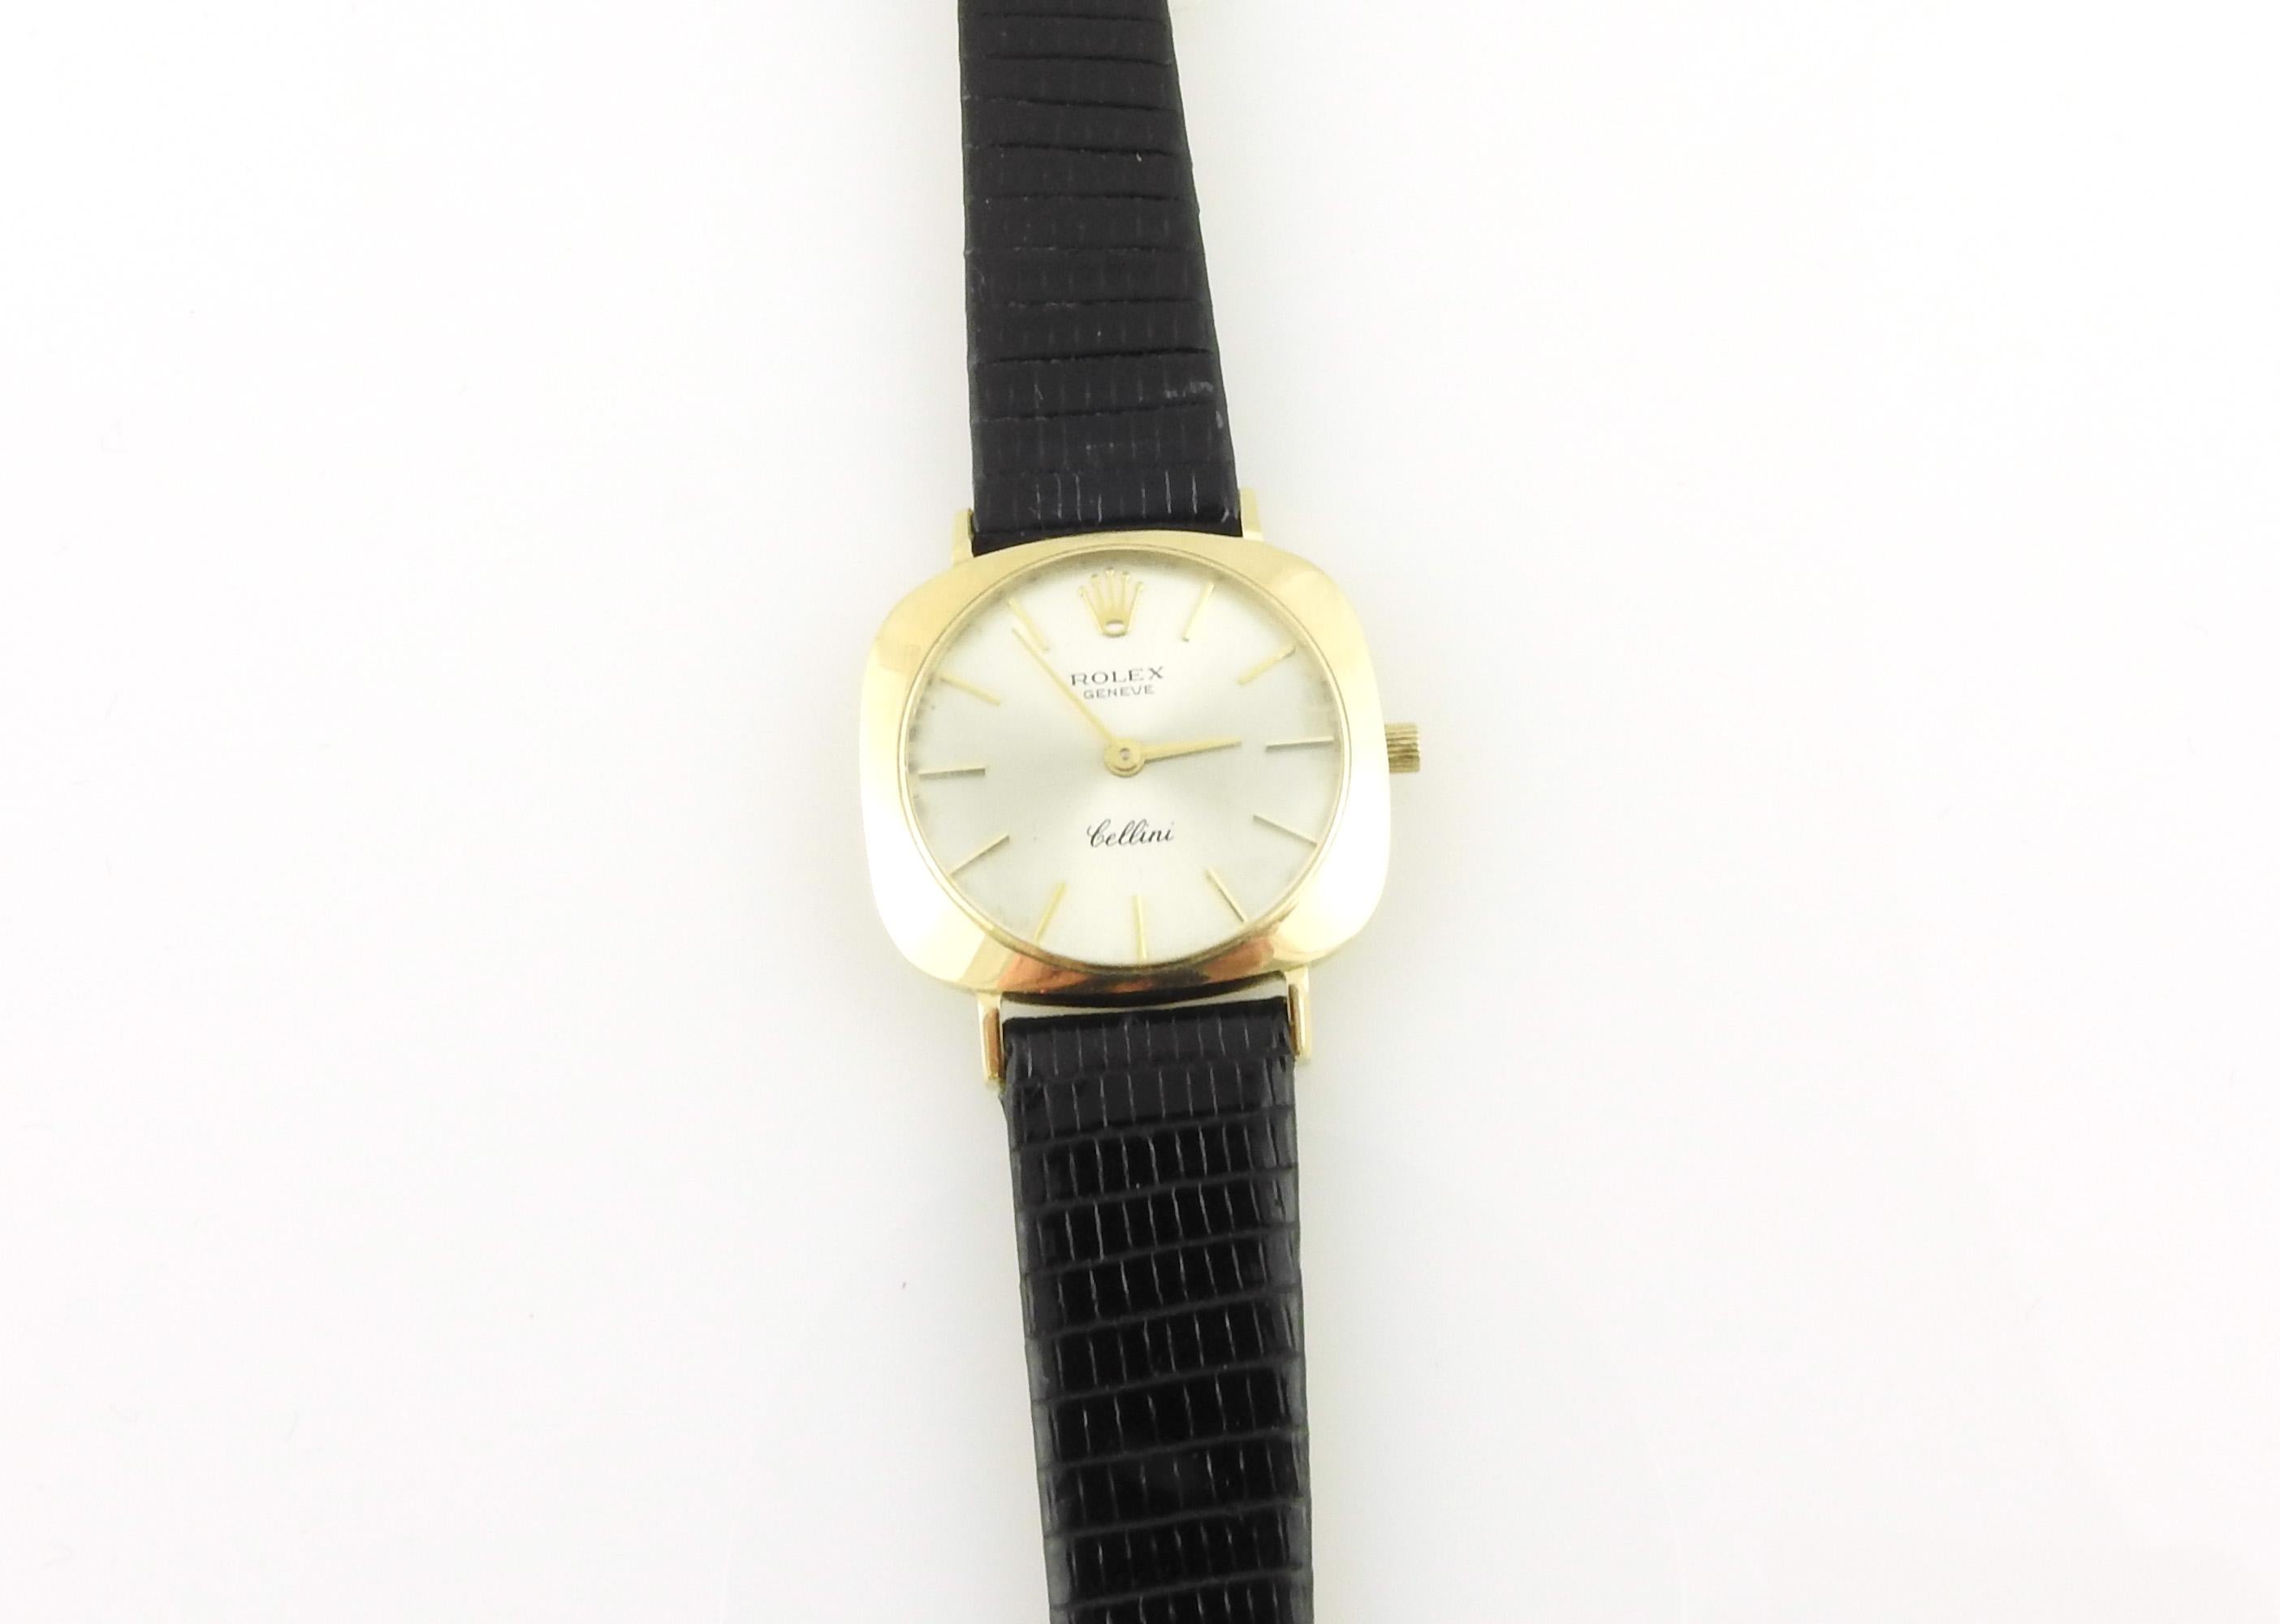 Vintage Rolex Ladies Cellini Watch

This classic and elegant ladies Rolex Cellini is set in 14K yellow gold

Silver Dial with gold markers

Hand winding automatic movement

Case is approx. 22.5 x 24.5mm

New black leather band with gold filled clap